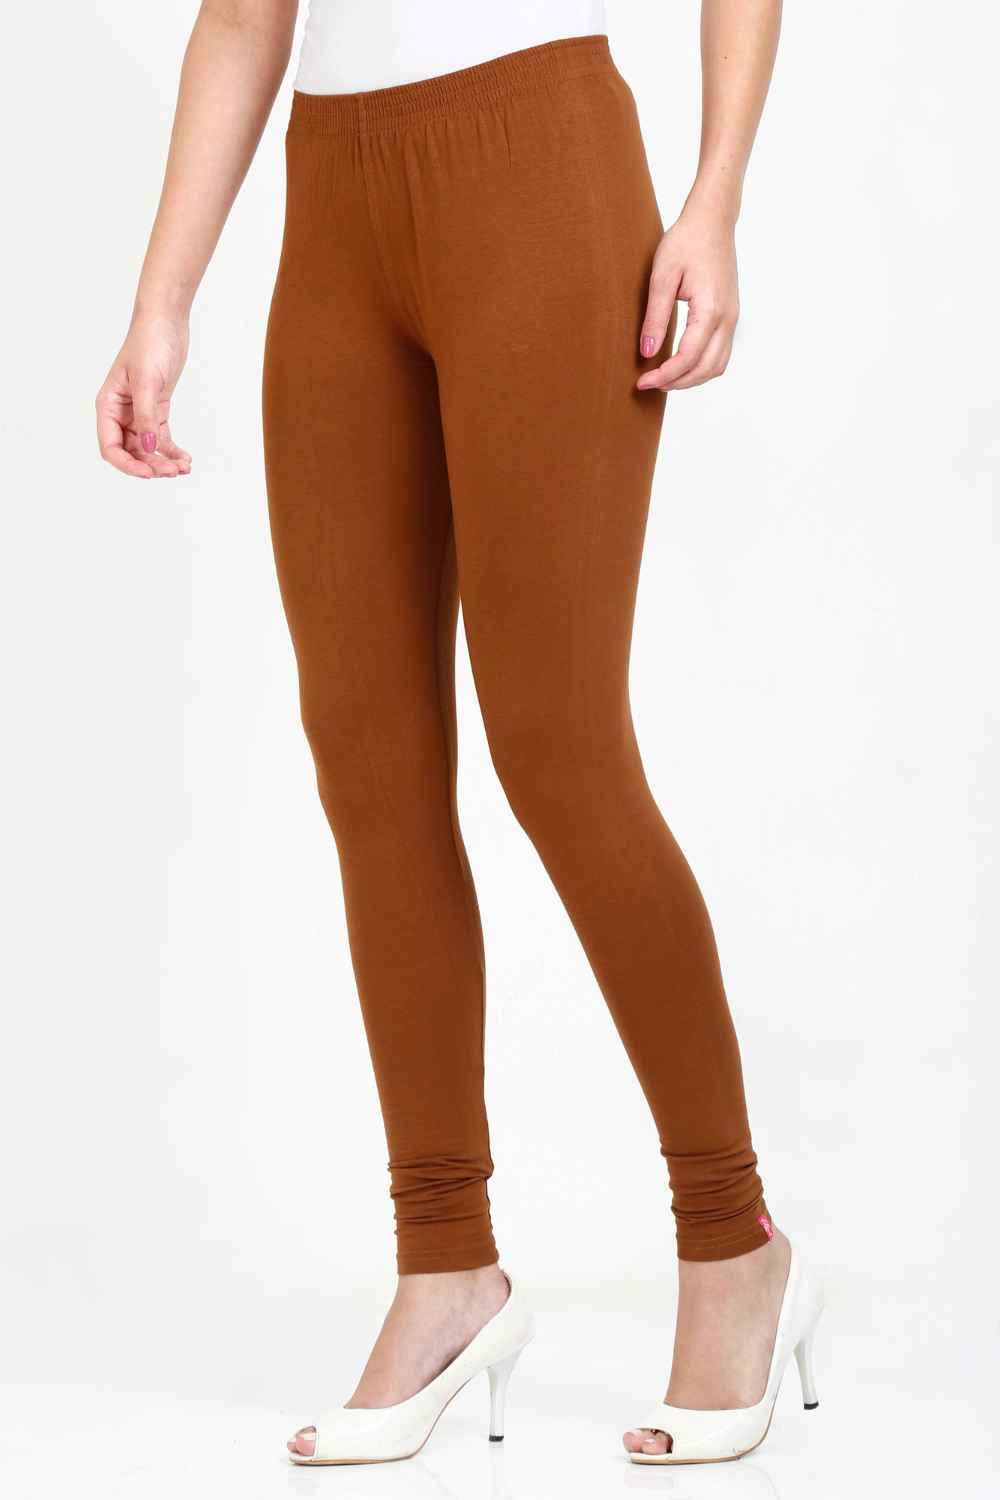 Plain Brown Colour Full Length Cotton Lycra Leggings at Rs 249.00 in  Secunderabad